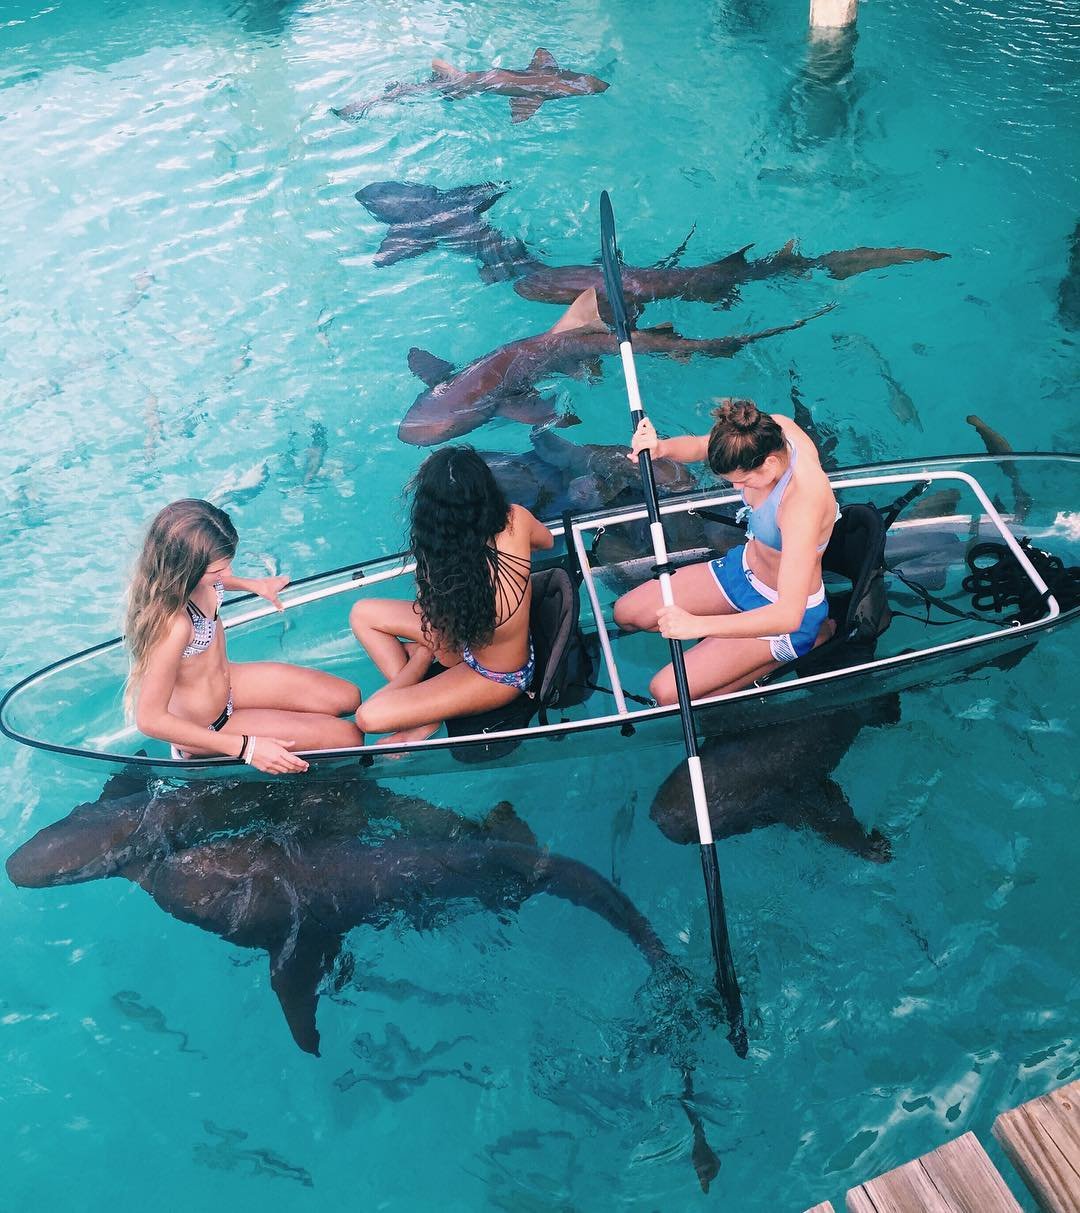 Bucket List: You must swim with these Sharks